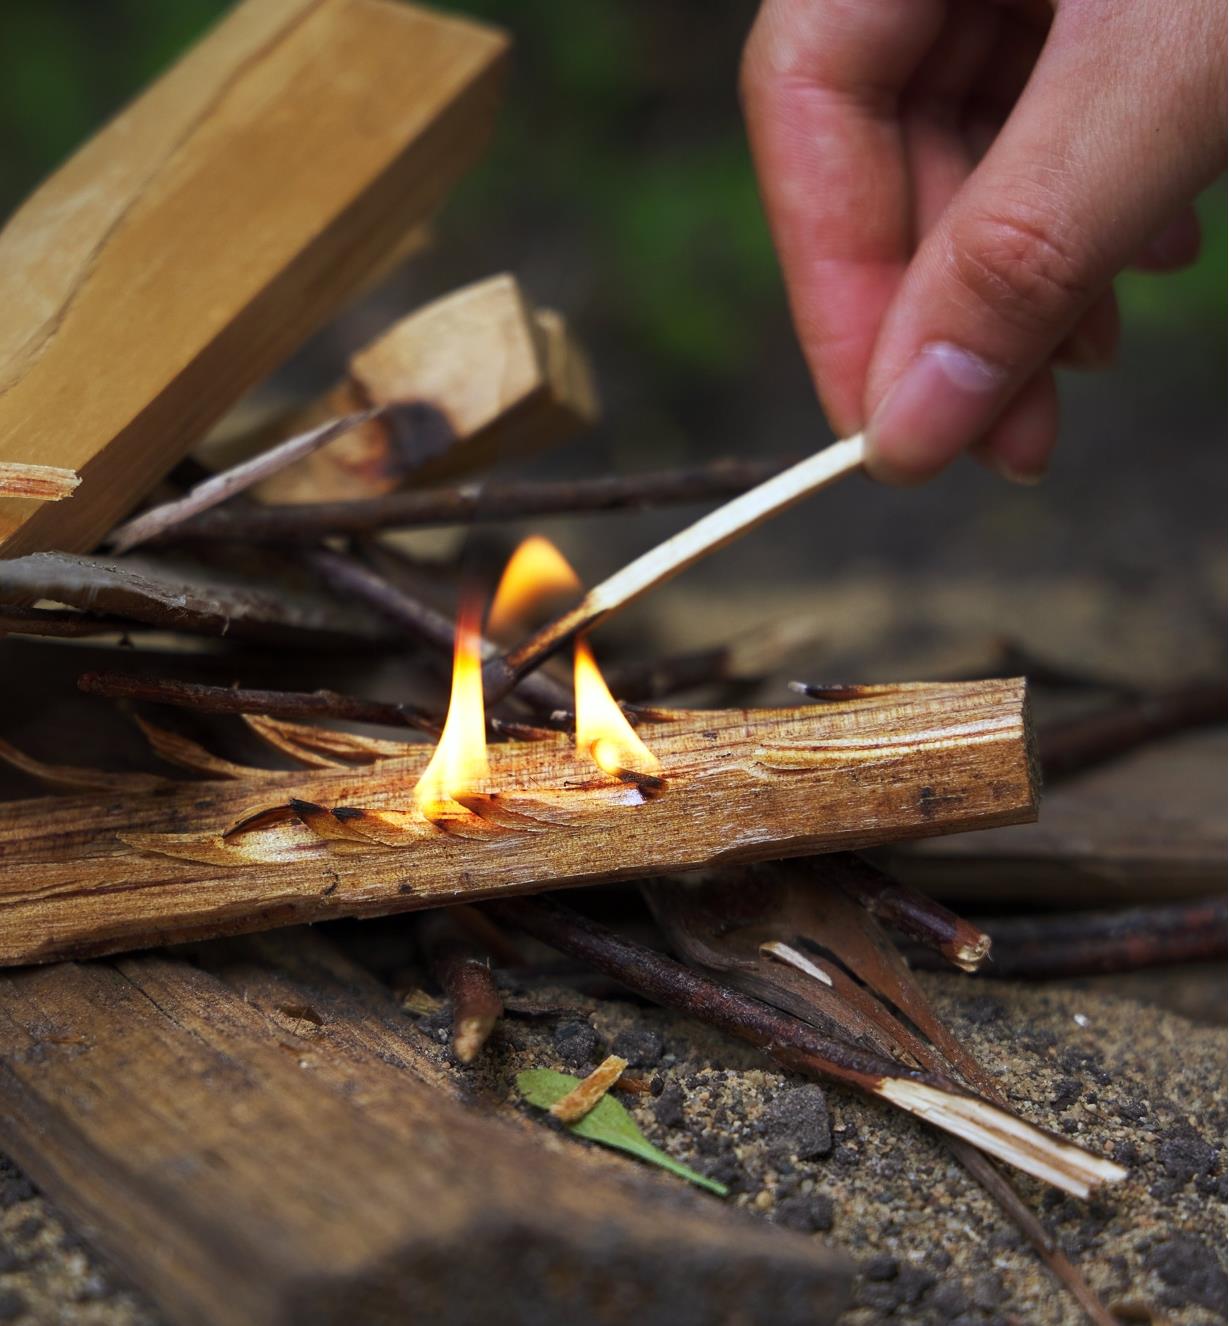 A Fatwood stick used to start a campfire